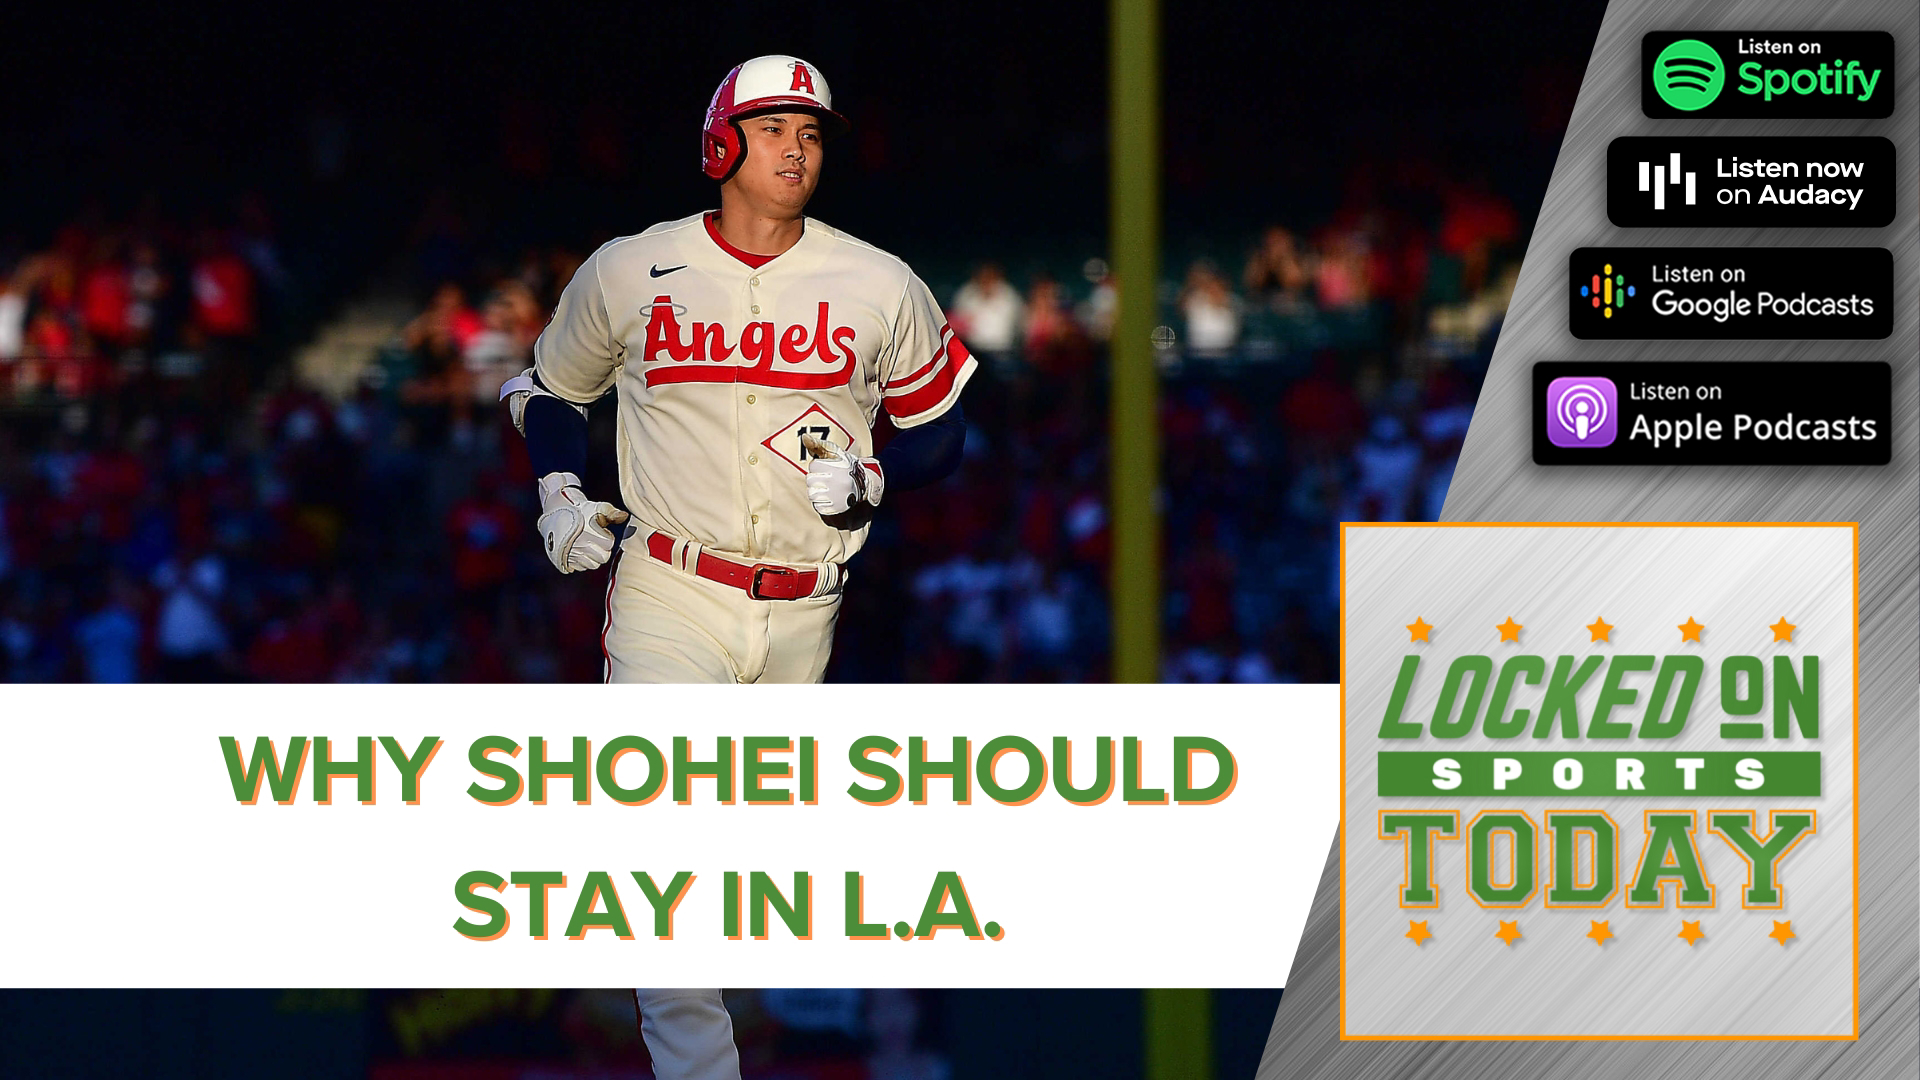 Discussing and debating the day's top sports stories from why Shohei should stay in L.A. to the eminent Juan Soto trade from the Nationals.